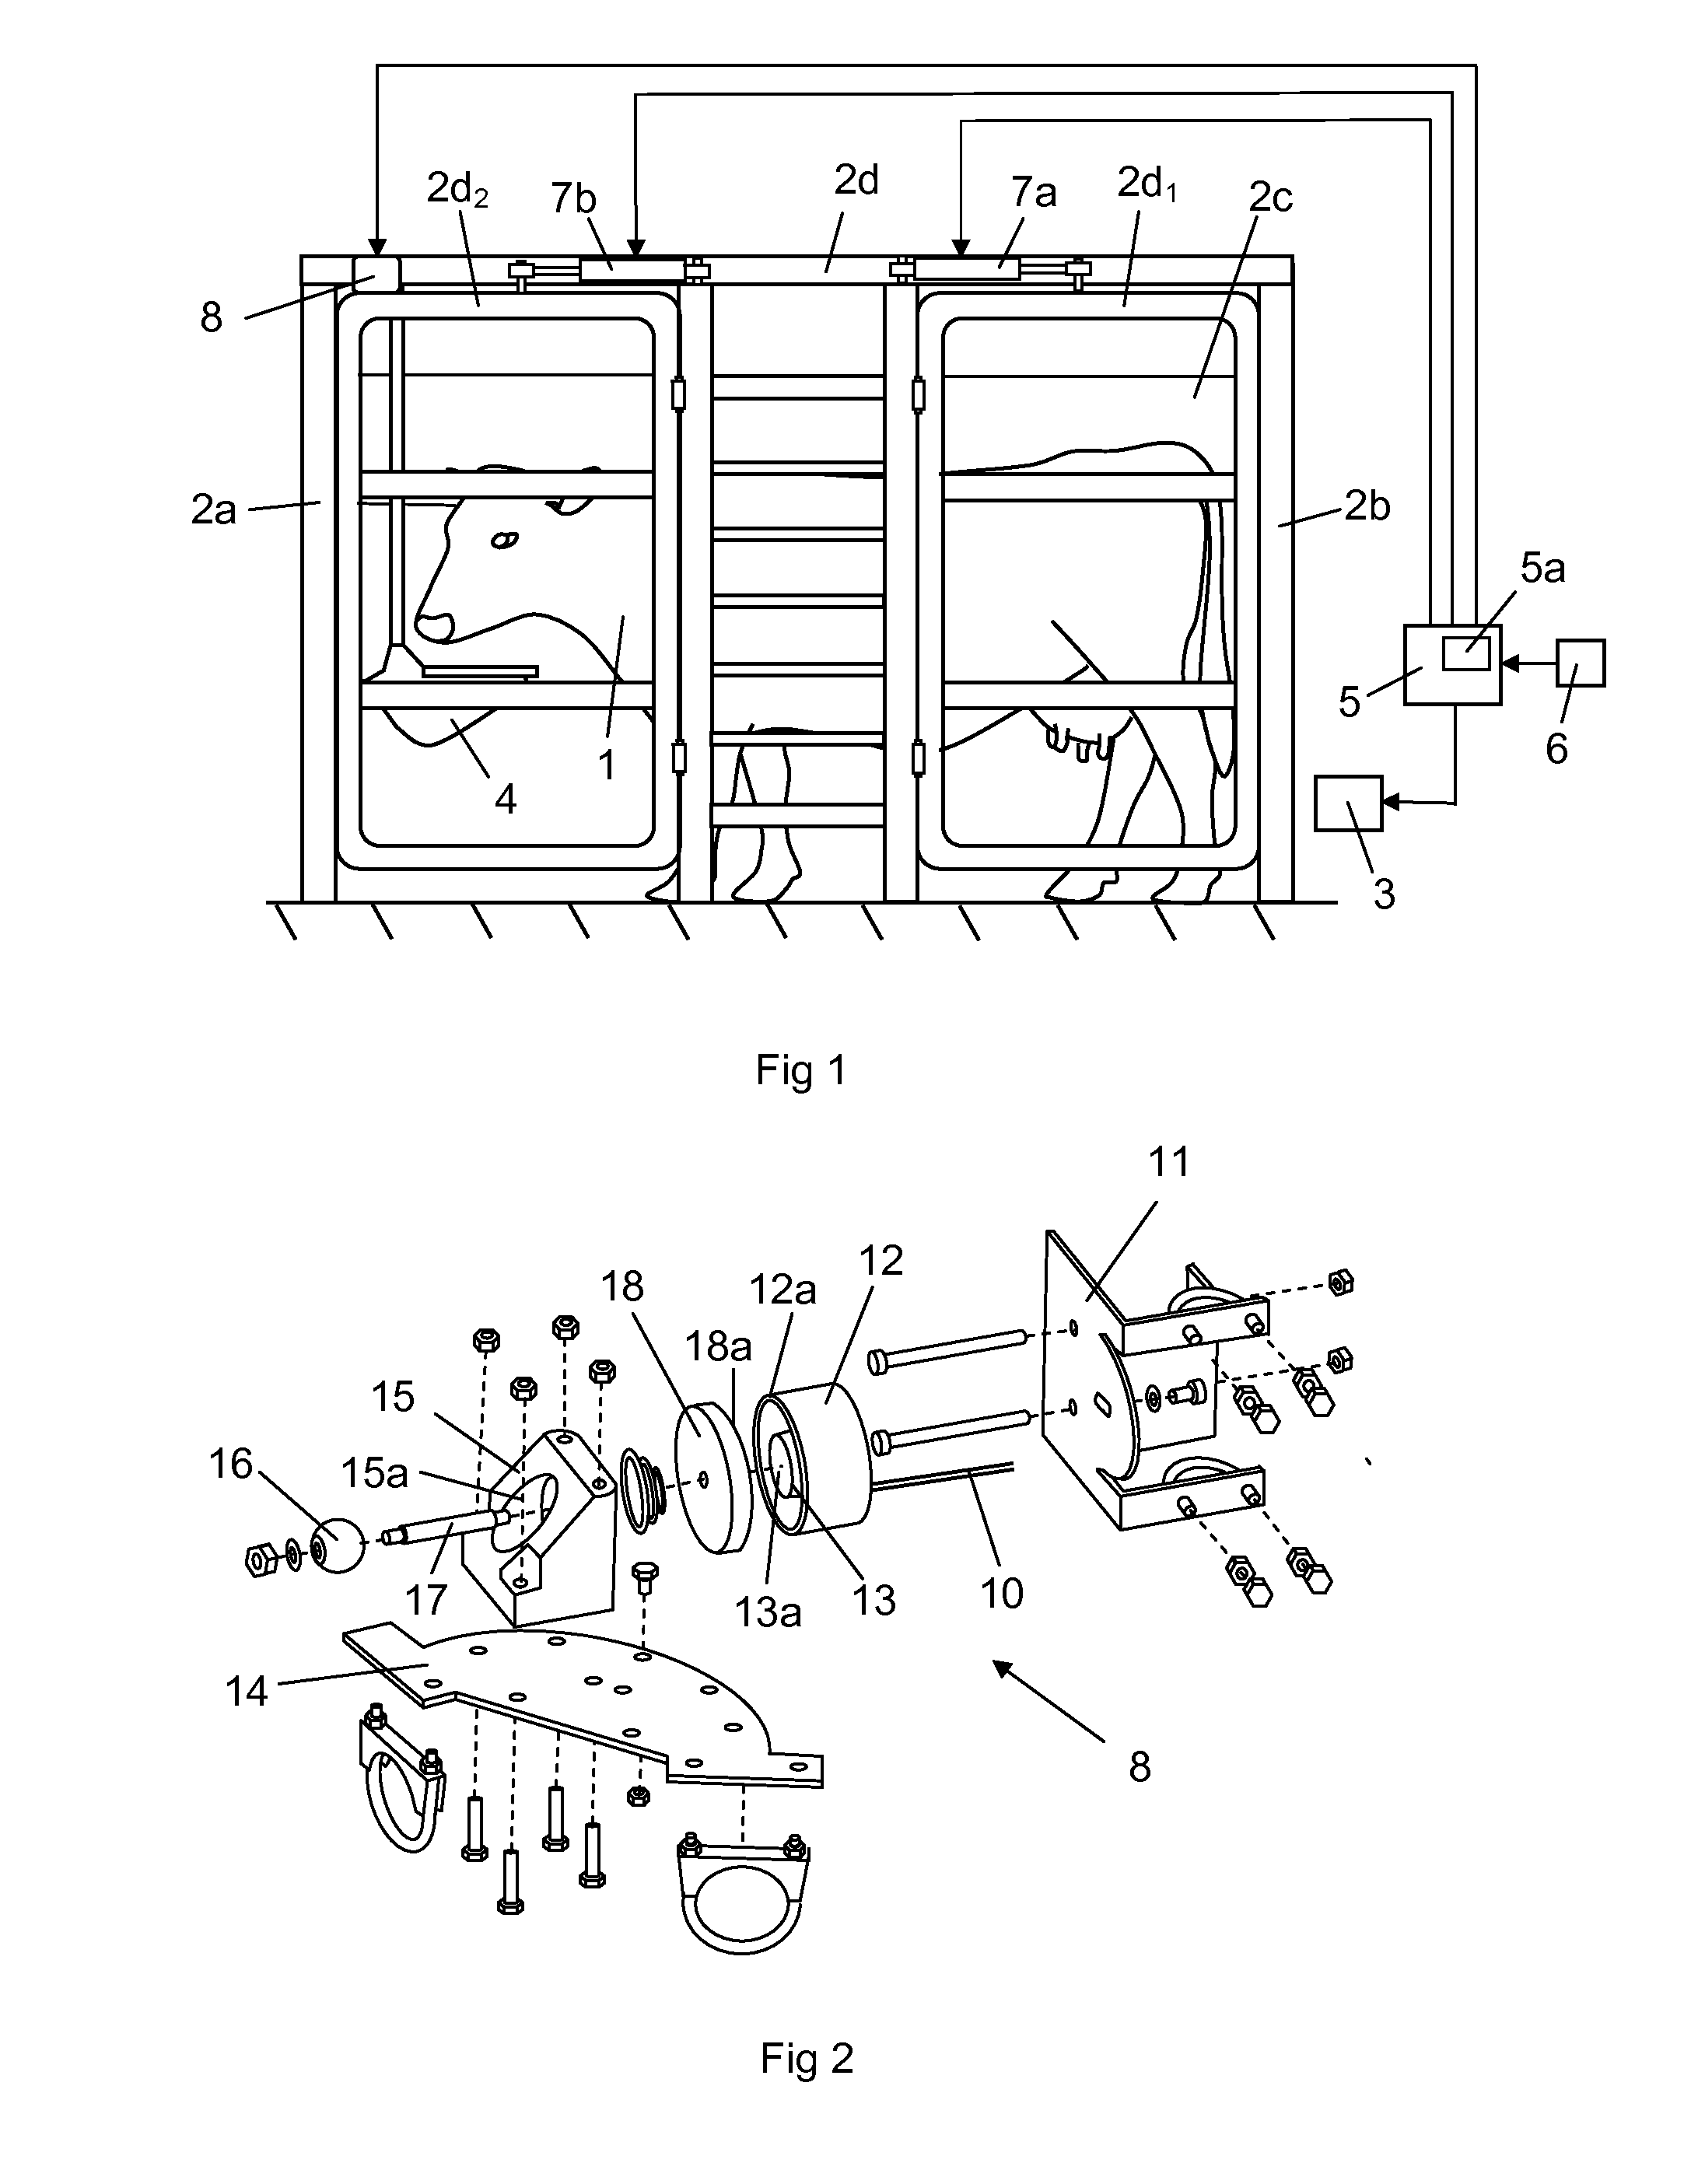 Gate arrangement to a fenced area for at least one animal